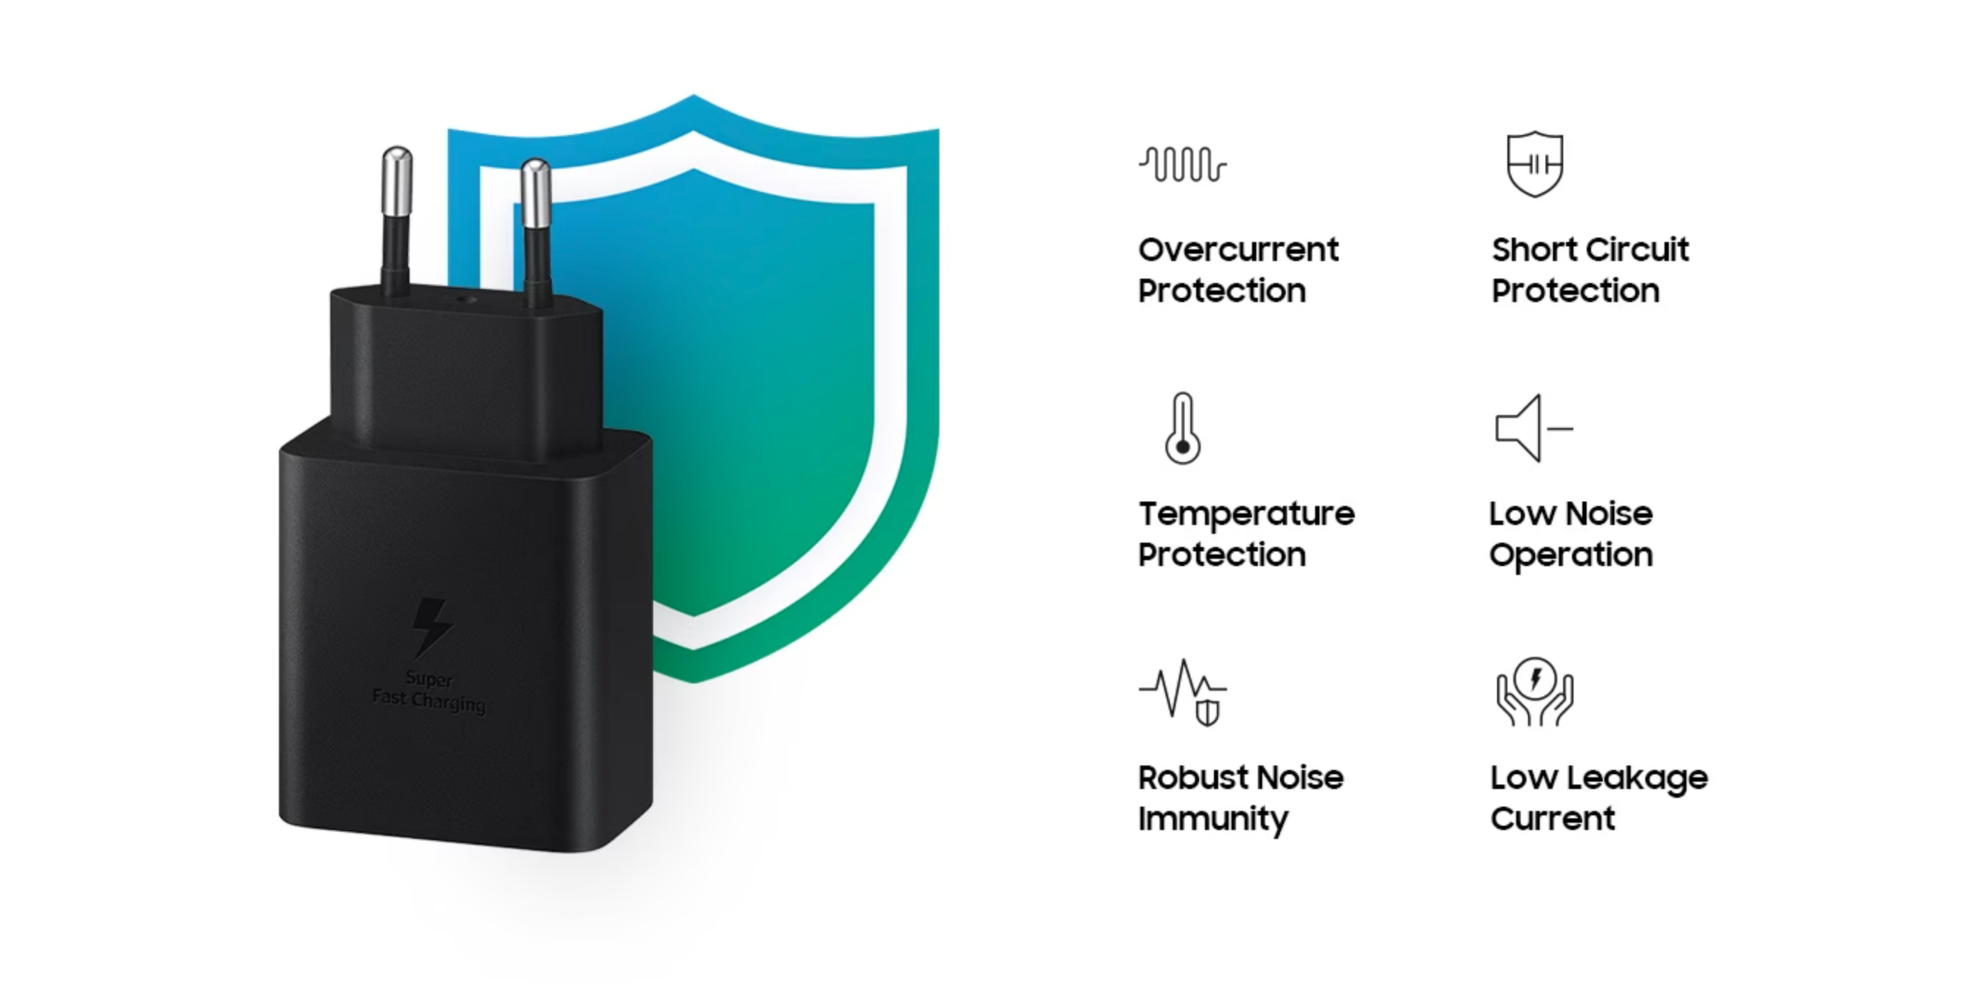 The 45W Power adapter stands on its end with the plug facing up in front of a green illustrated shield. On the right, there are 6 safety icons with text below each one: Overcurrent protection, Temperature protection, Robust Noise Immunity, Short circuit protection, Low noise operation, Low leakage current.